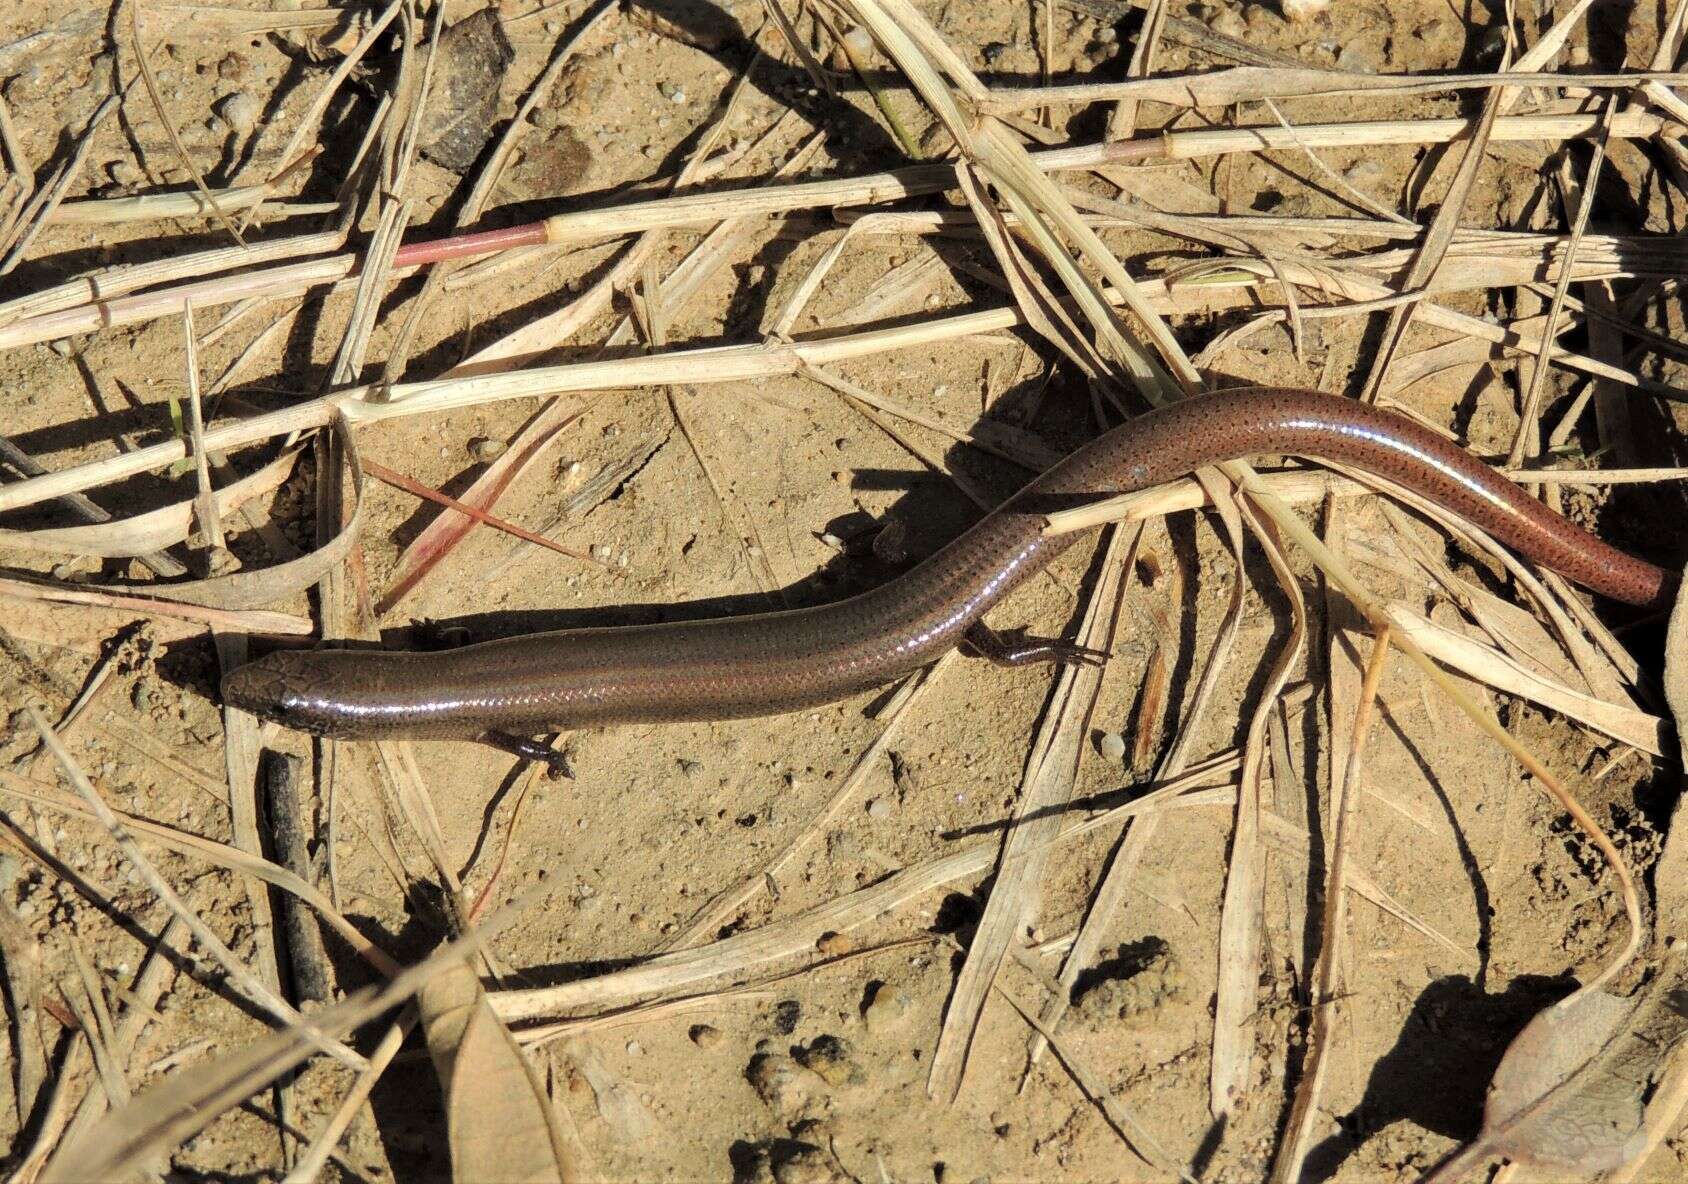 Image of Fine-spotted Mulch-skink